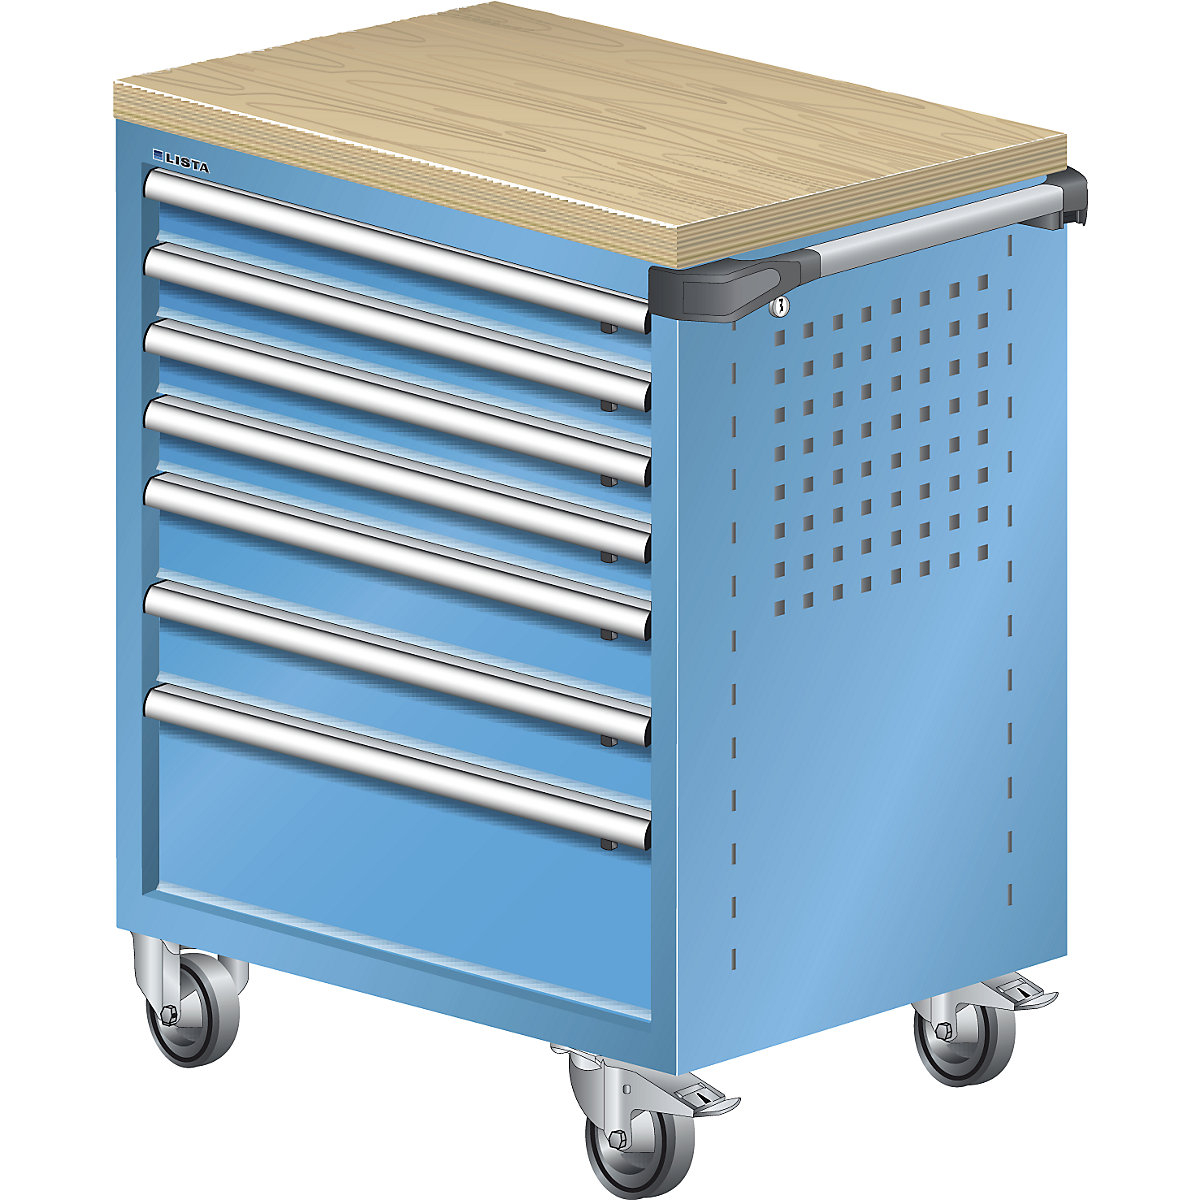 Workshop trolley – LISTA, with multiplex wooden cover 40 mm, 7 drawers, blue-2